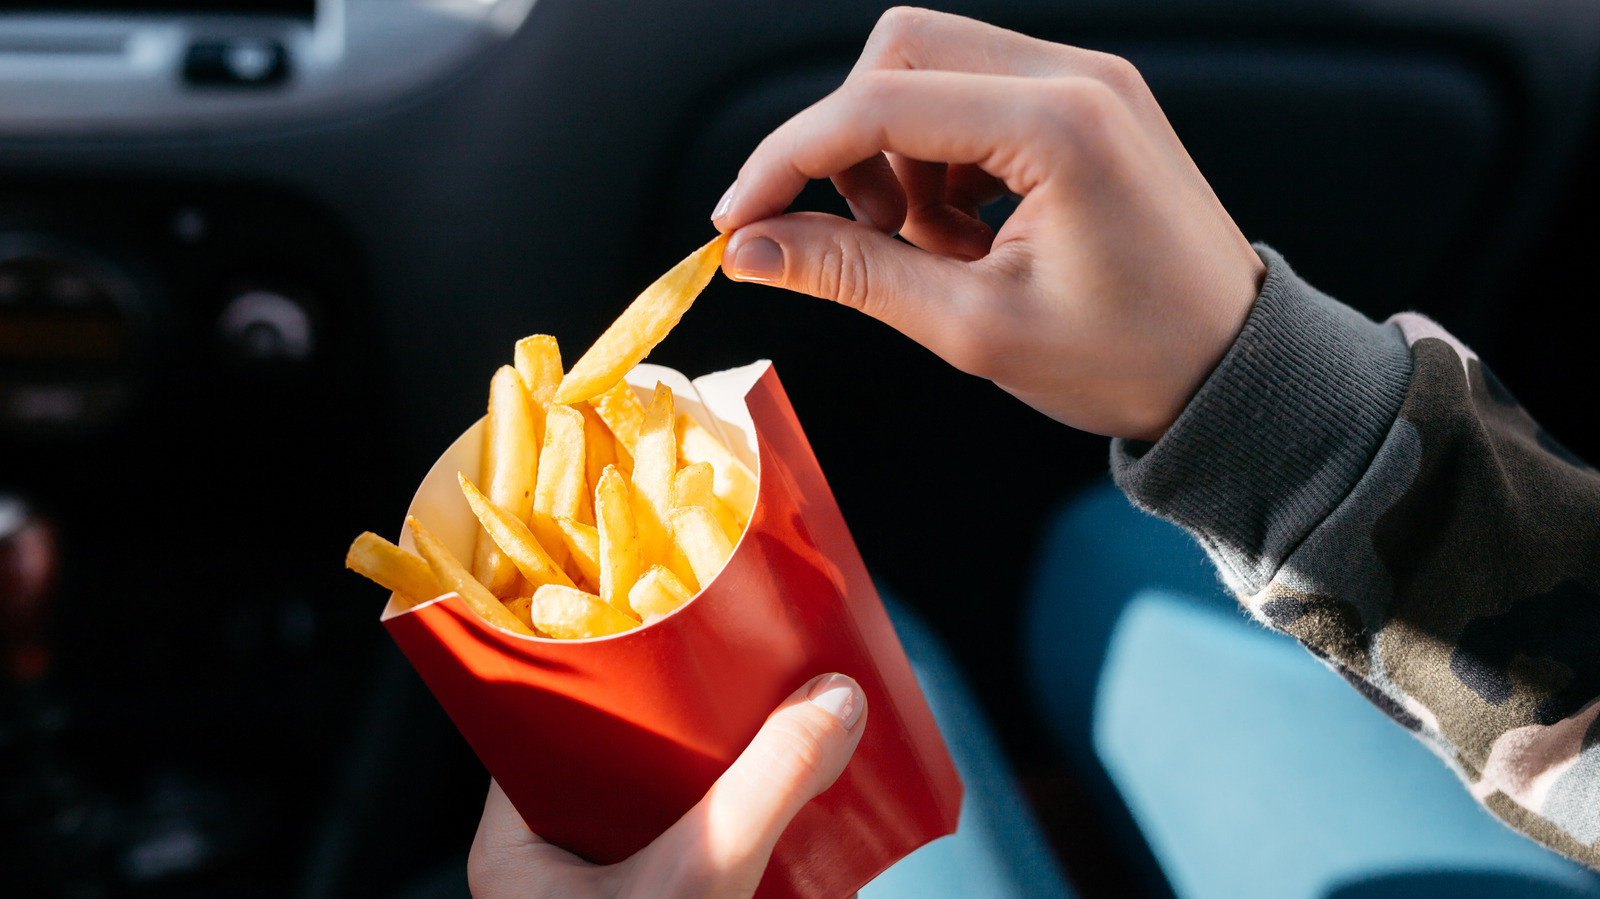 You Can Buy A Sauce Holder To Make Your Car-Eating Dreams Come True